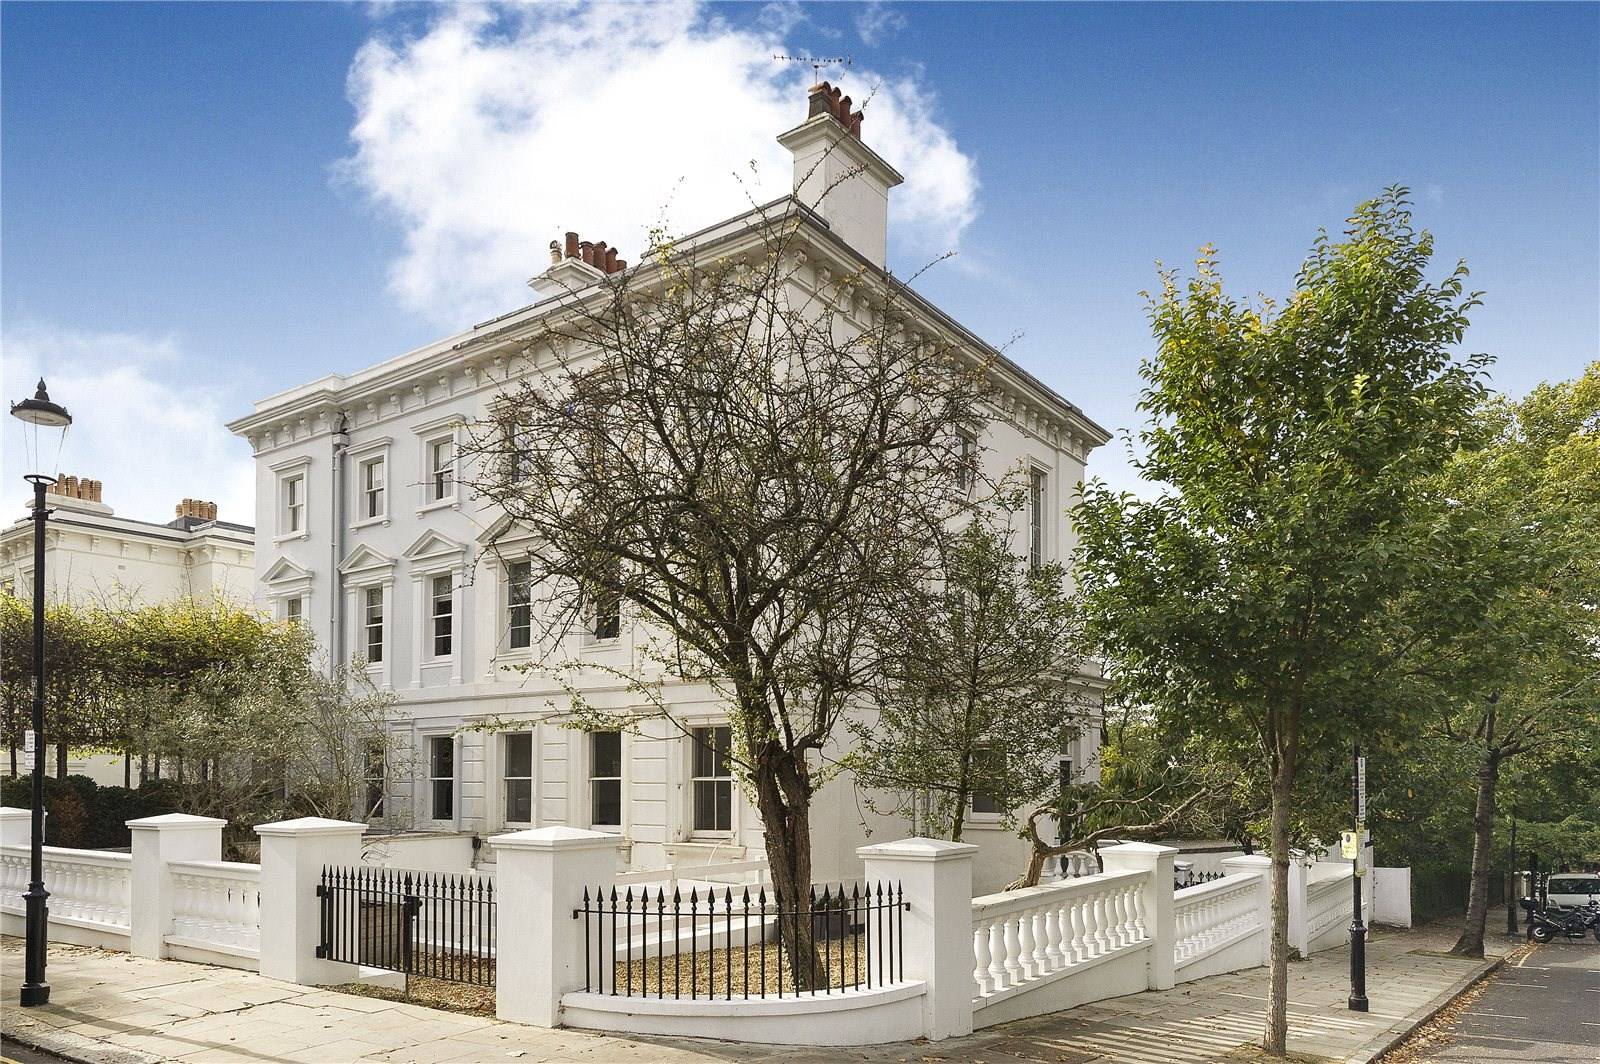 This 19th-century Grade II-listed house in London’s Notting Hill is distinguished by the symmetry, scale, and ornamentation of the Greek Revival movement.